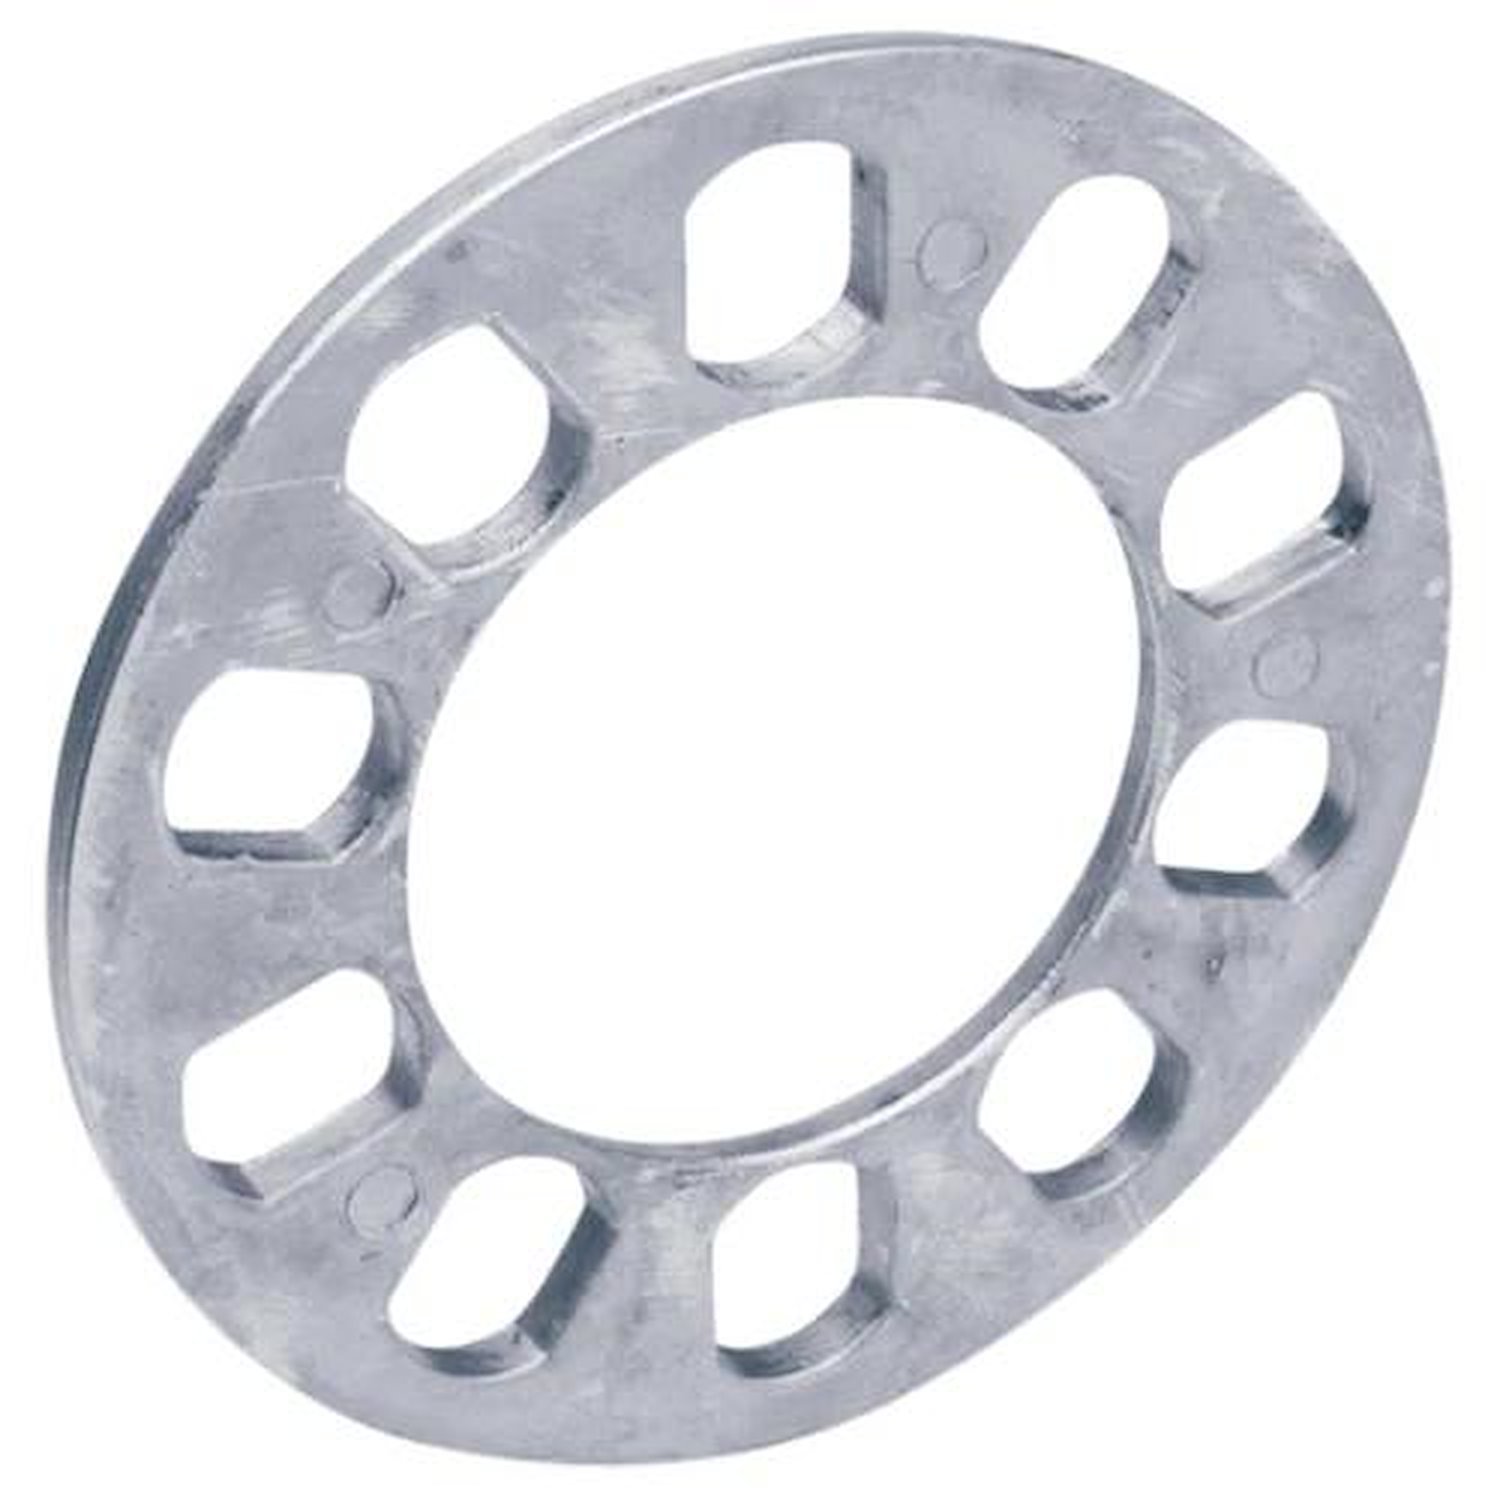 SP602C Wheel Spacer, 5 x 4.5 / 5 x 130, 5/16" Thick